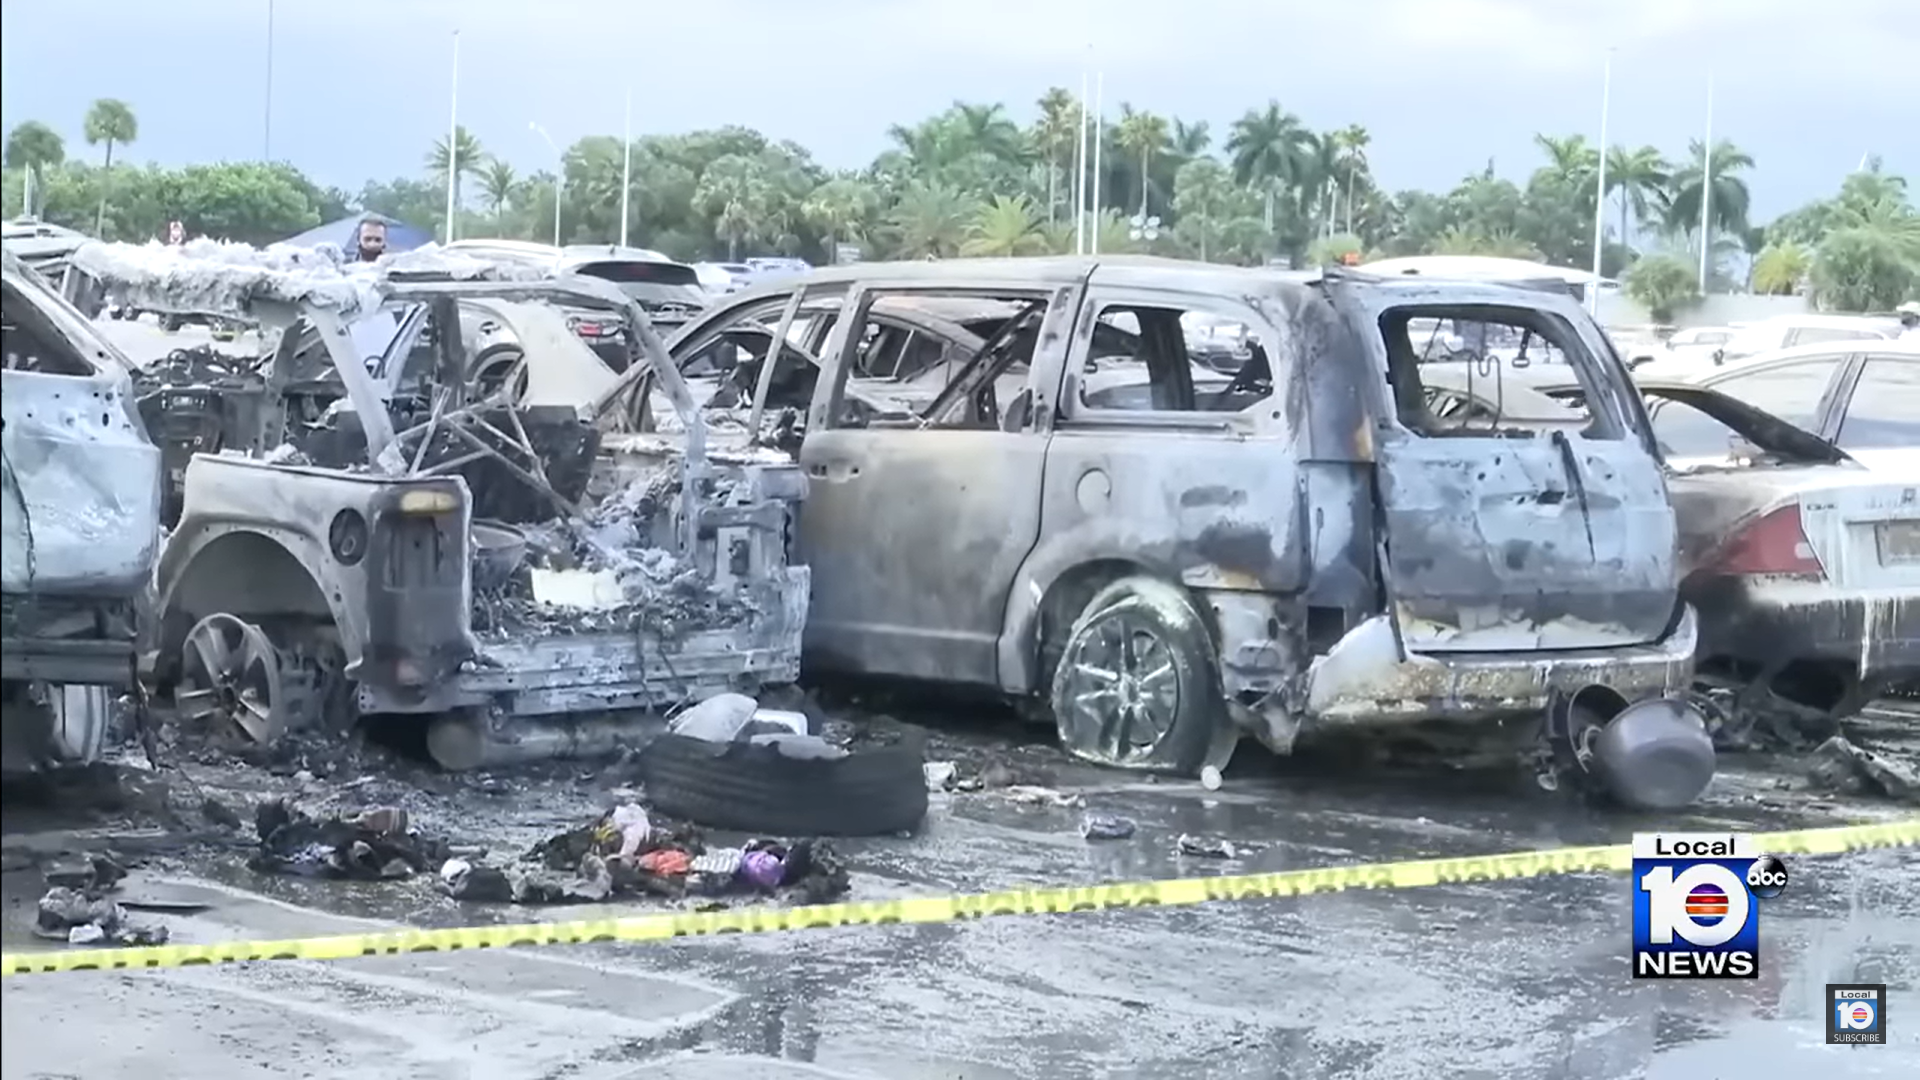 Miami Hard Rock Stadium fire: Blaze erupts in parking lot outside  Dolphins-Patriots game